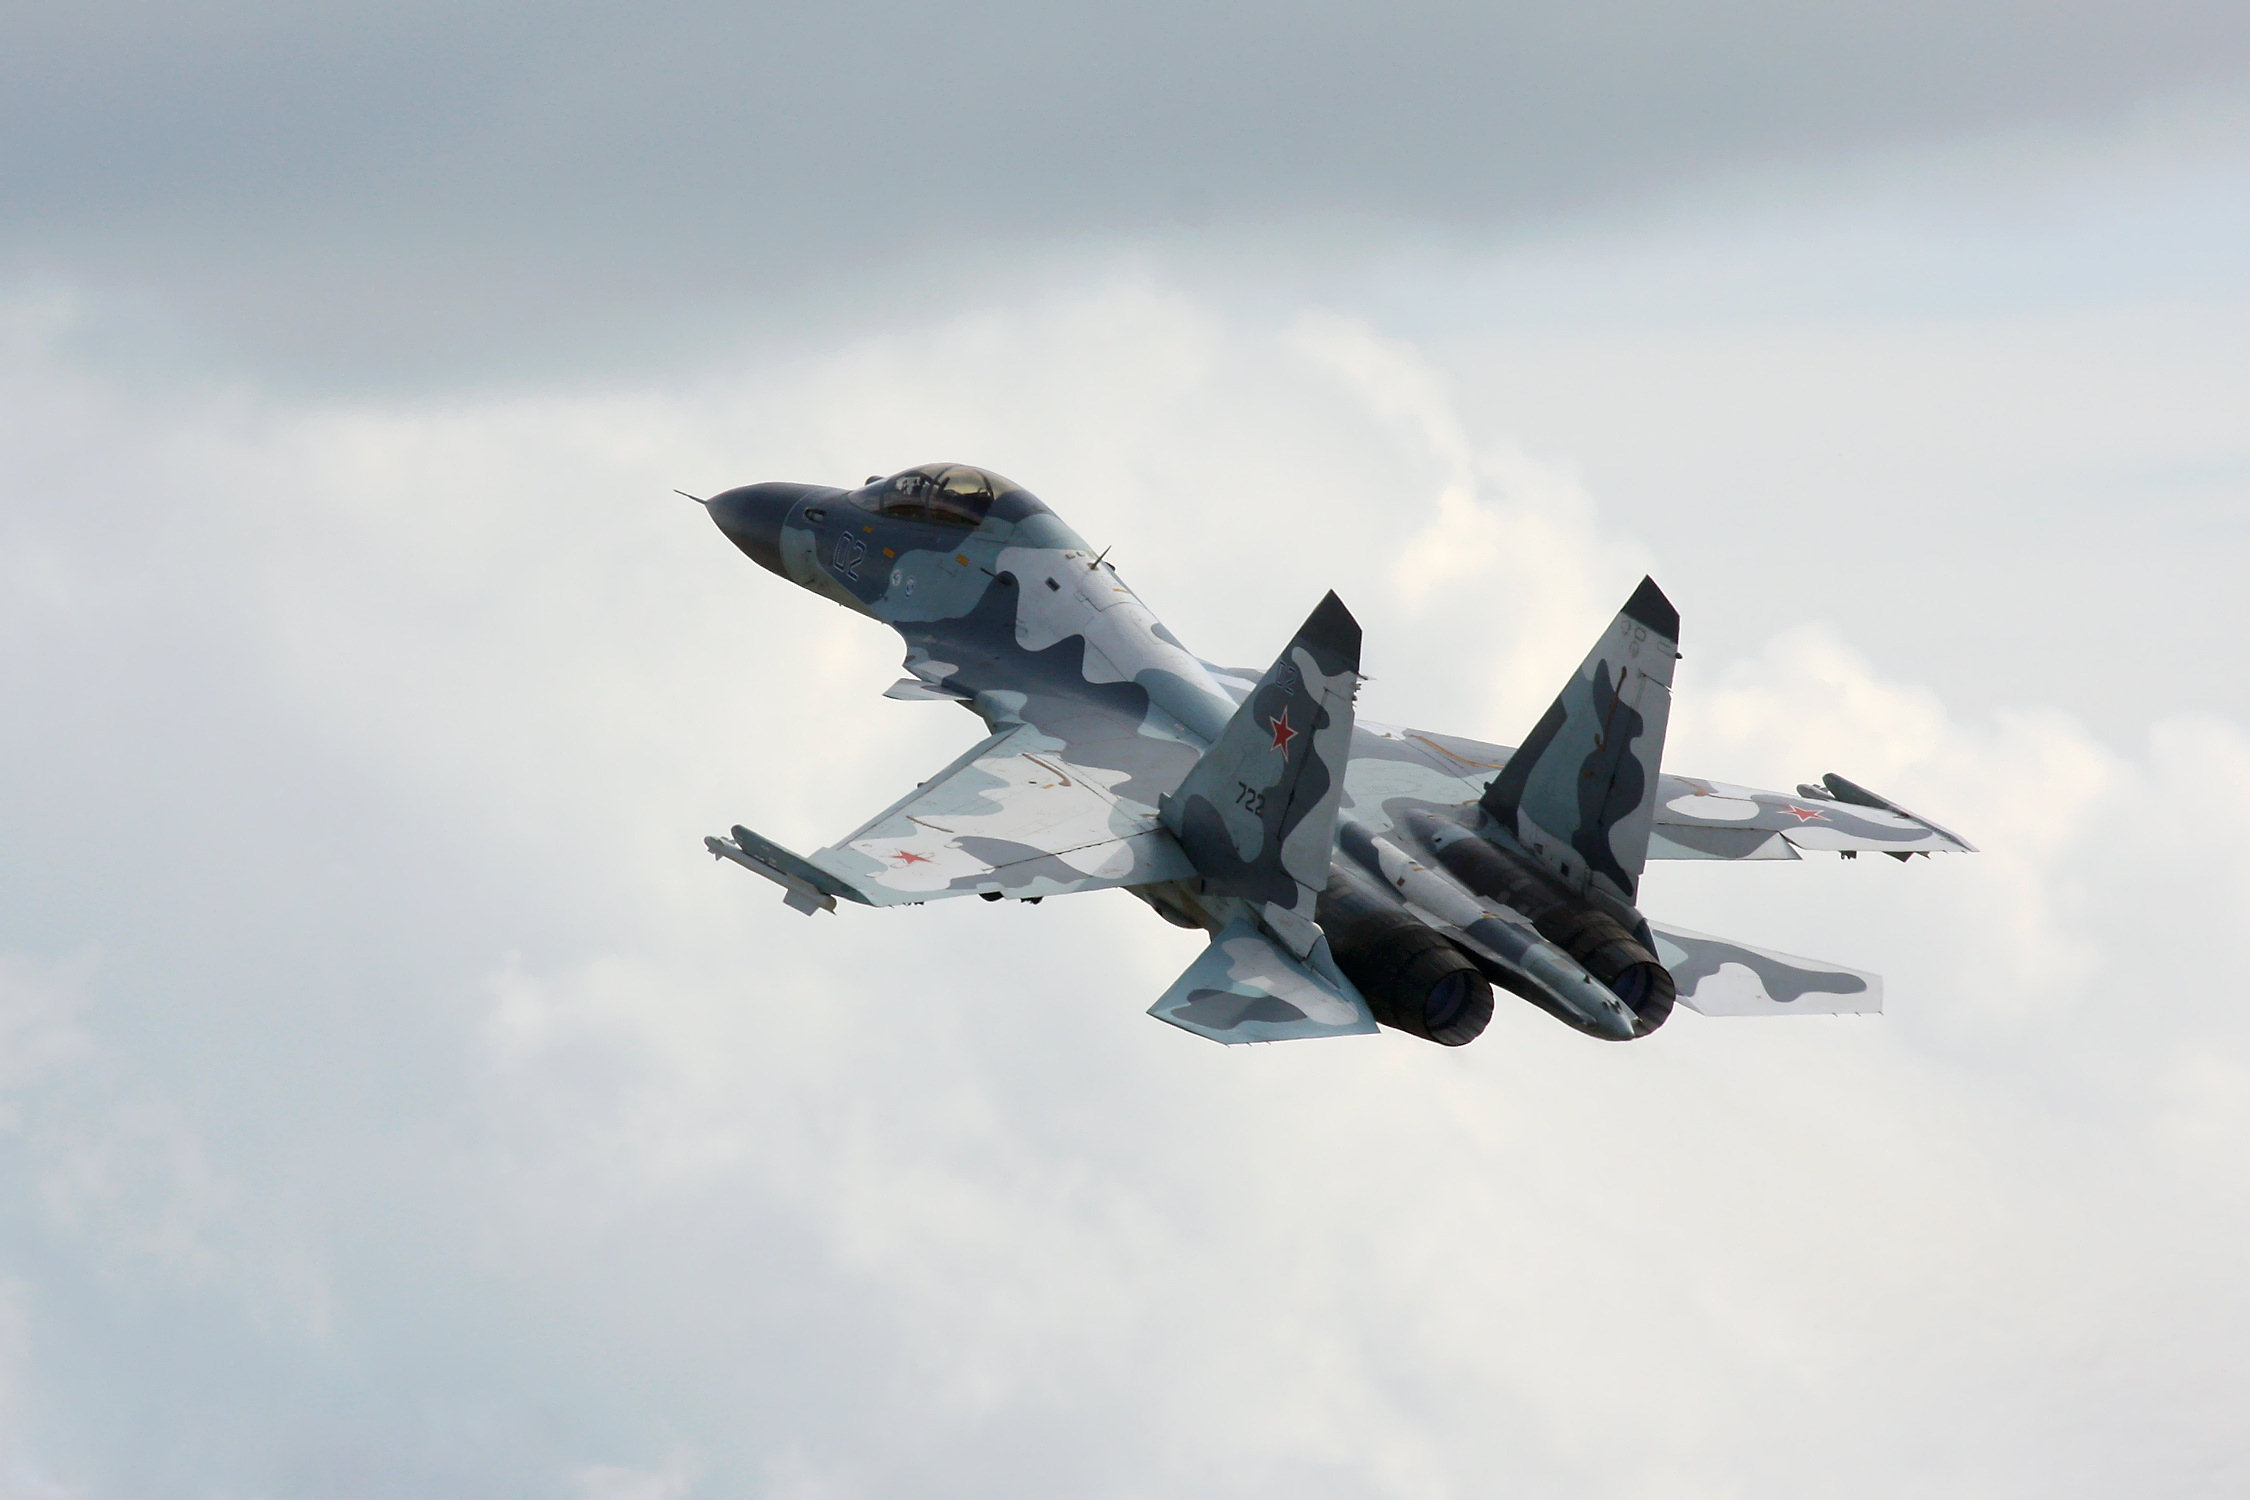 vertical wallpaper warplane, aircraft, sukhoi su 35, military, air force, jet fighters